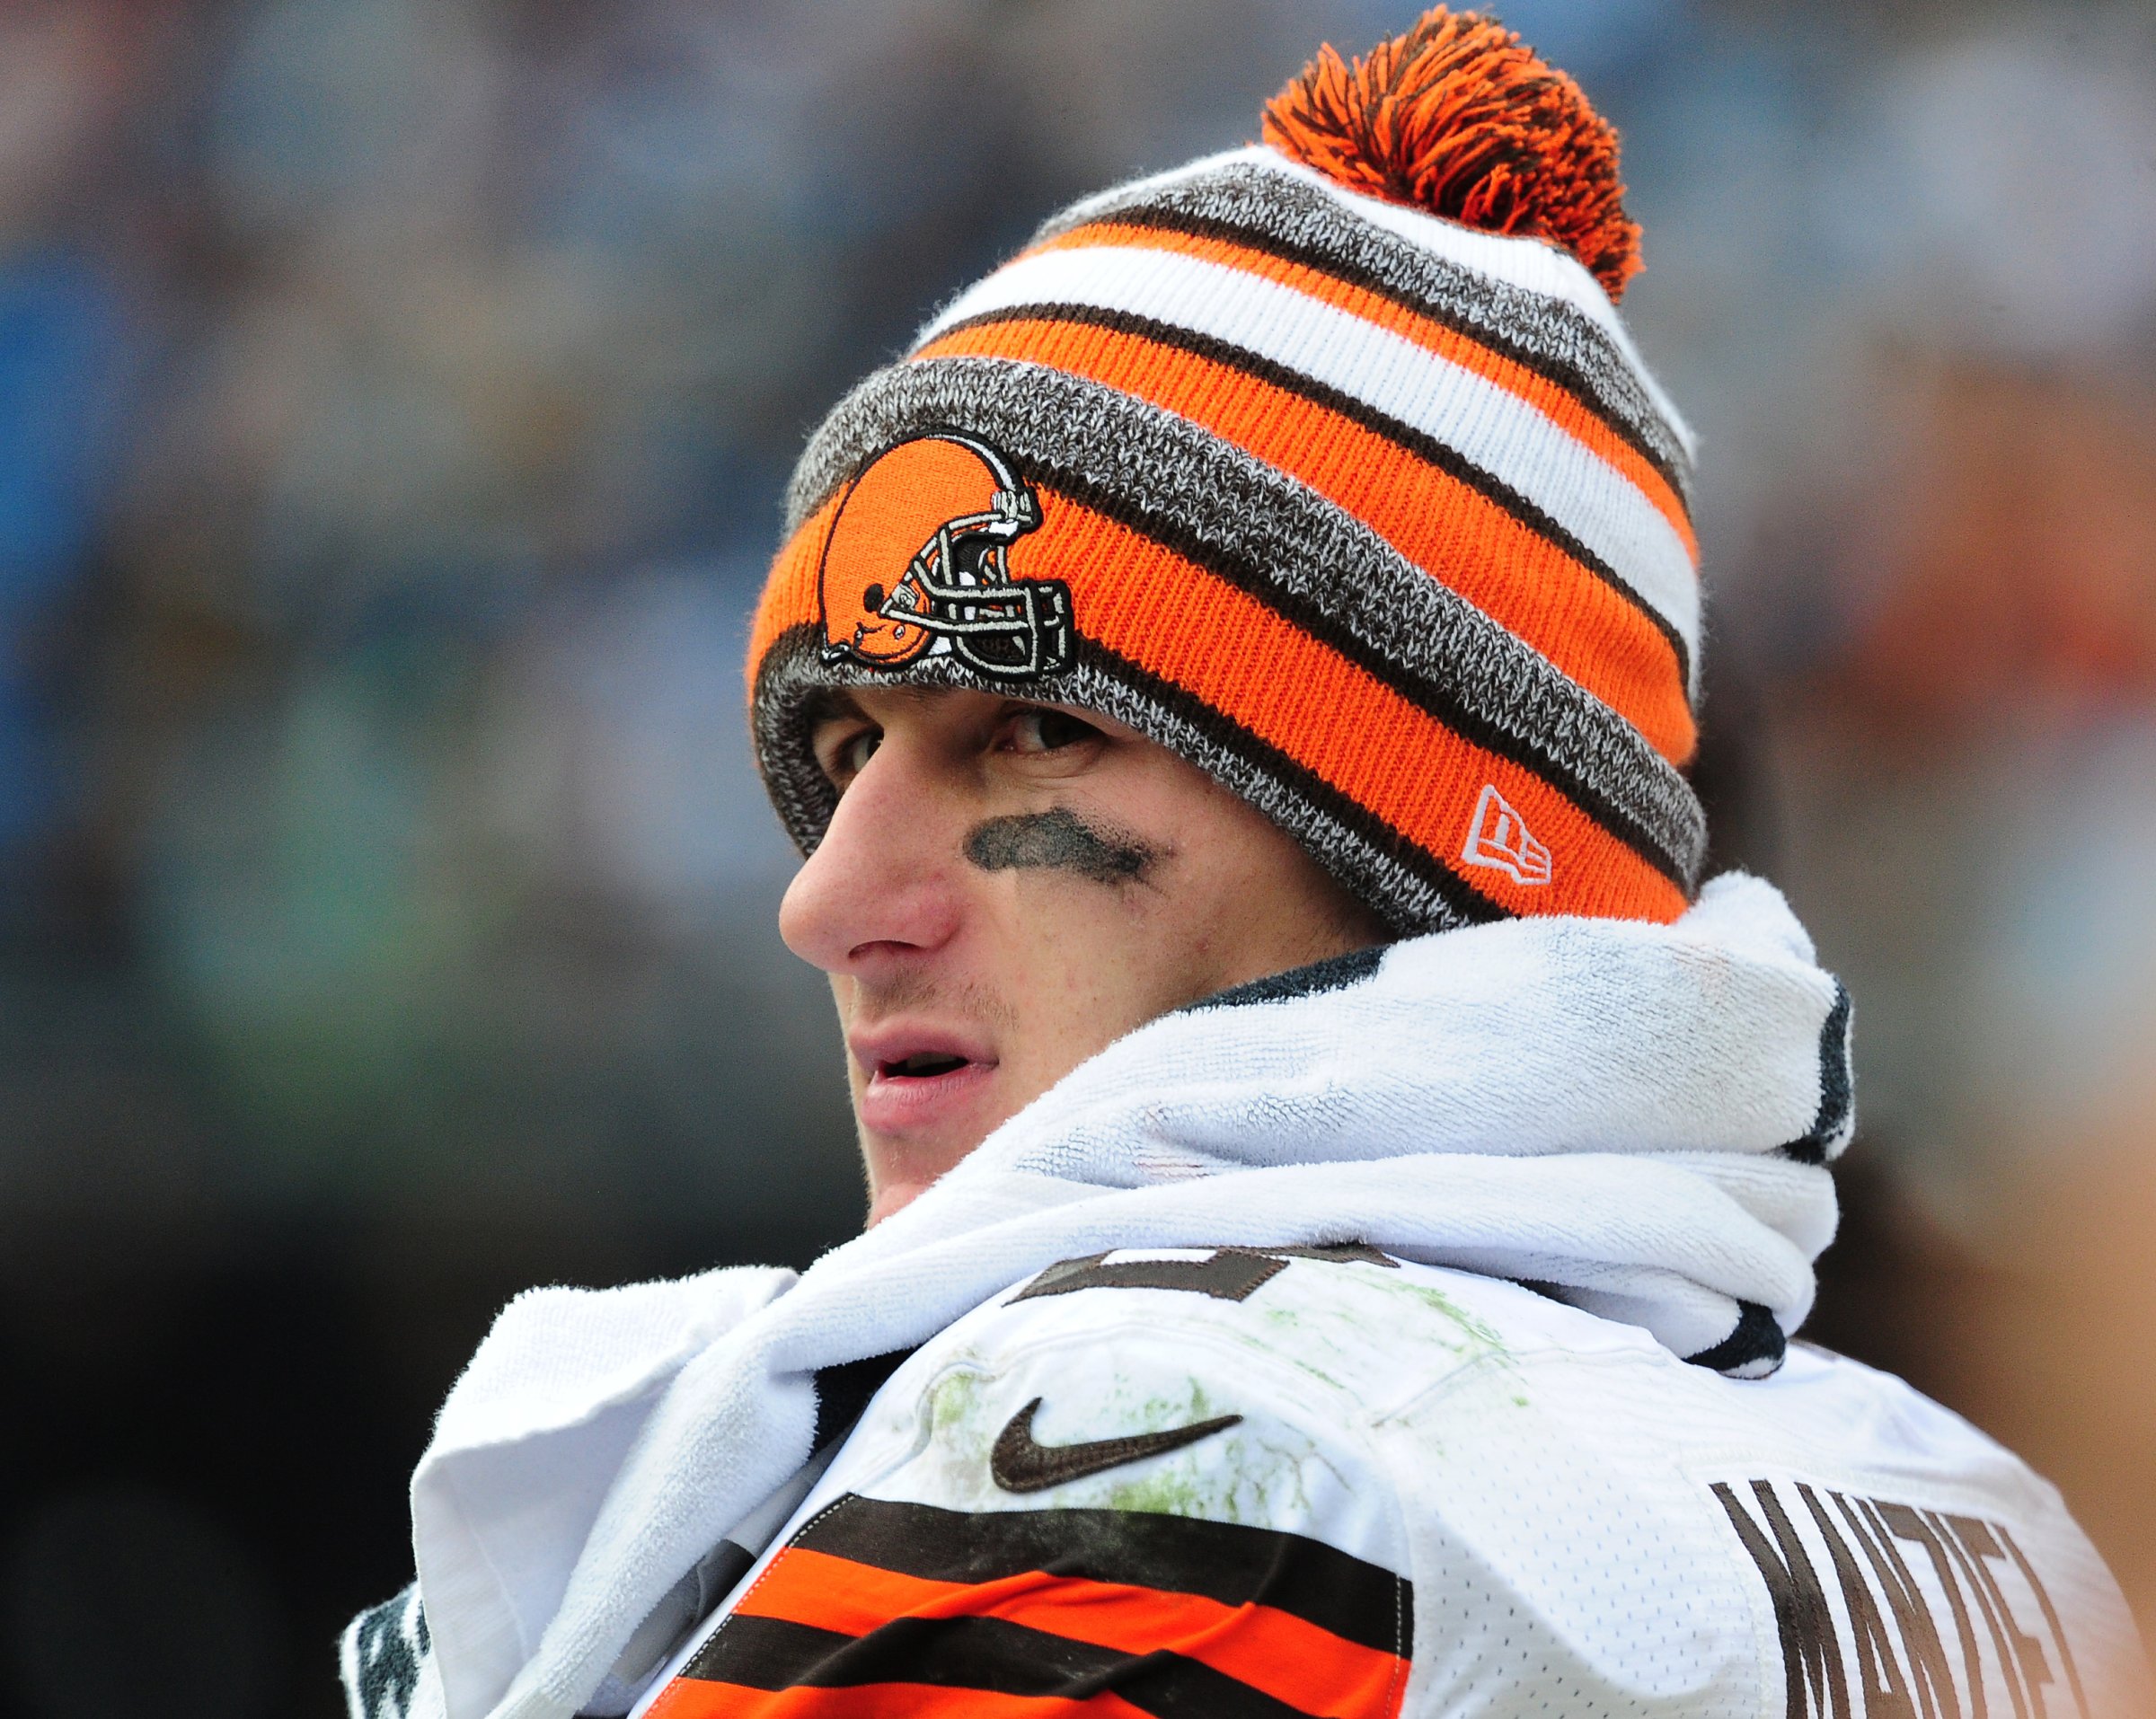 Johnny Manziel of the Cleveland Browns at the game against the Carolina Panthers on Dec. 21, 2014.